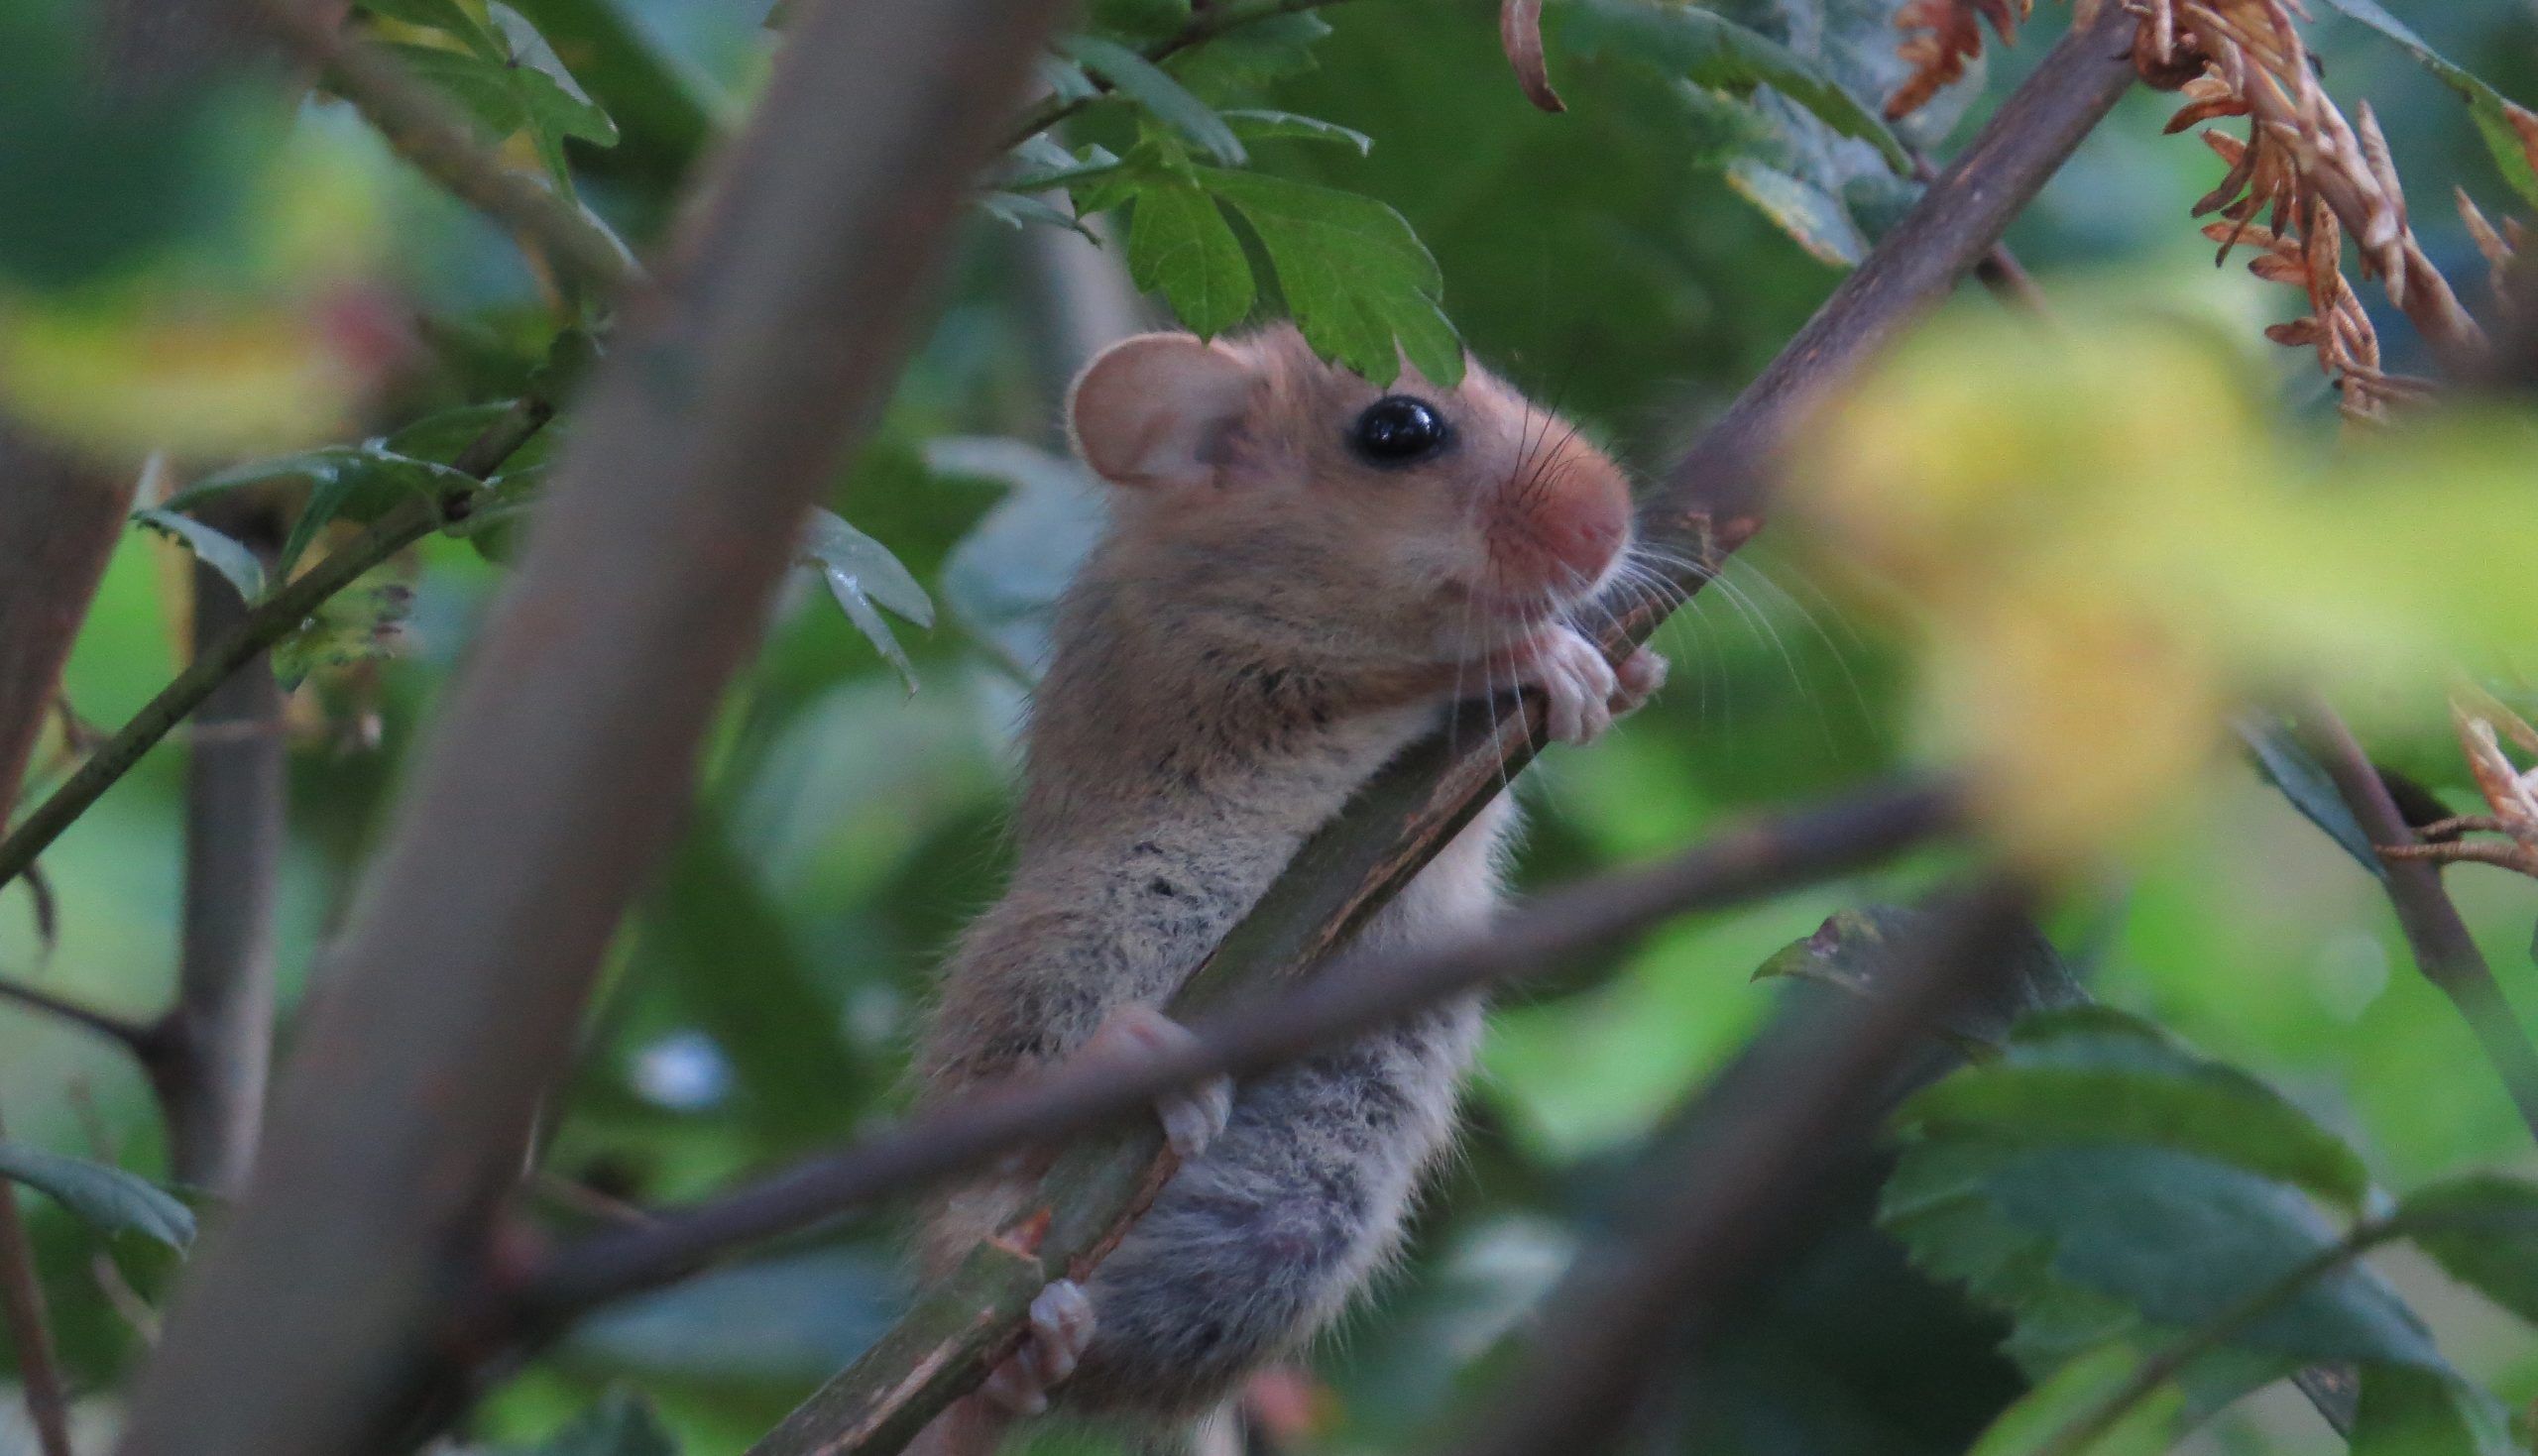 Young dormouse 2 Study hedge Locks Park 29 October 2013 Robert Wolton free to use